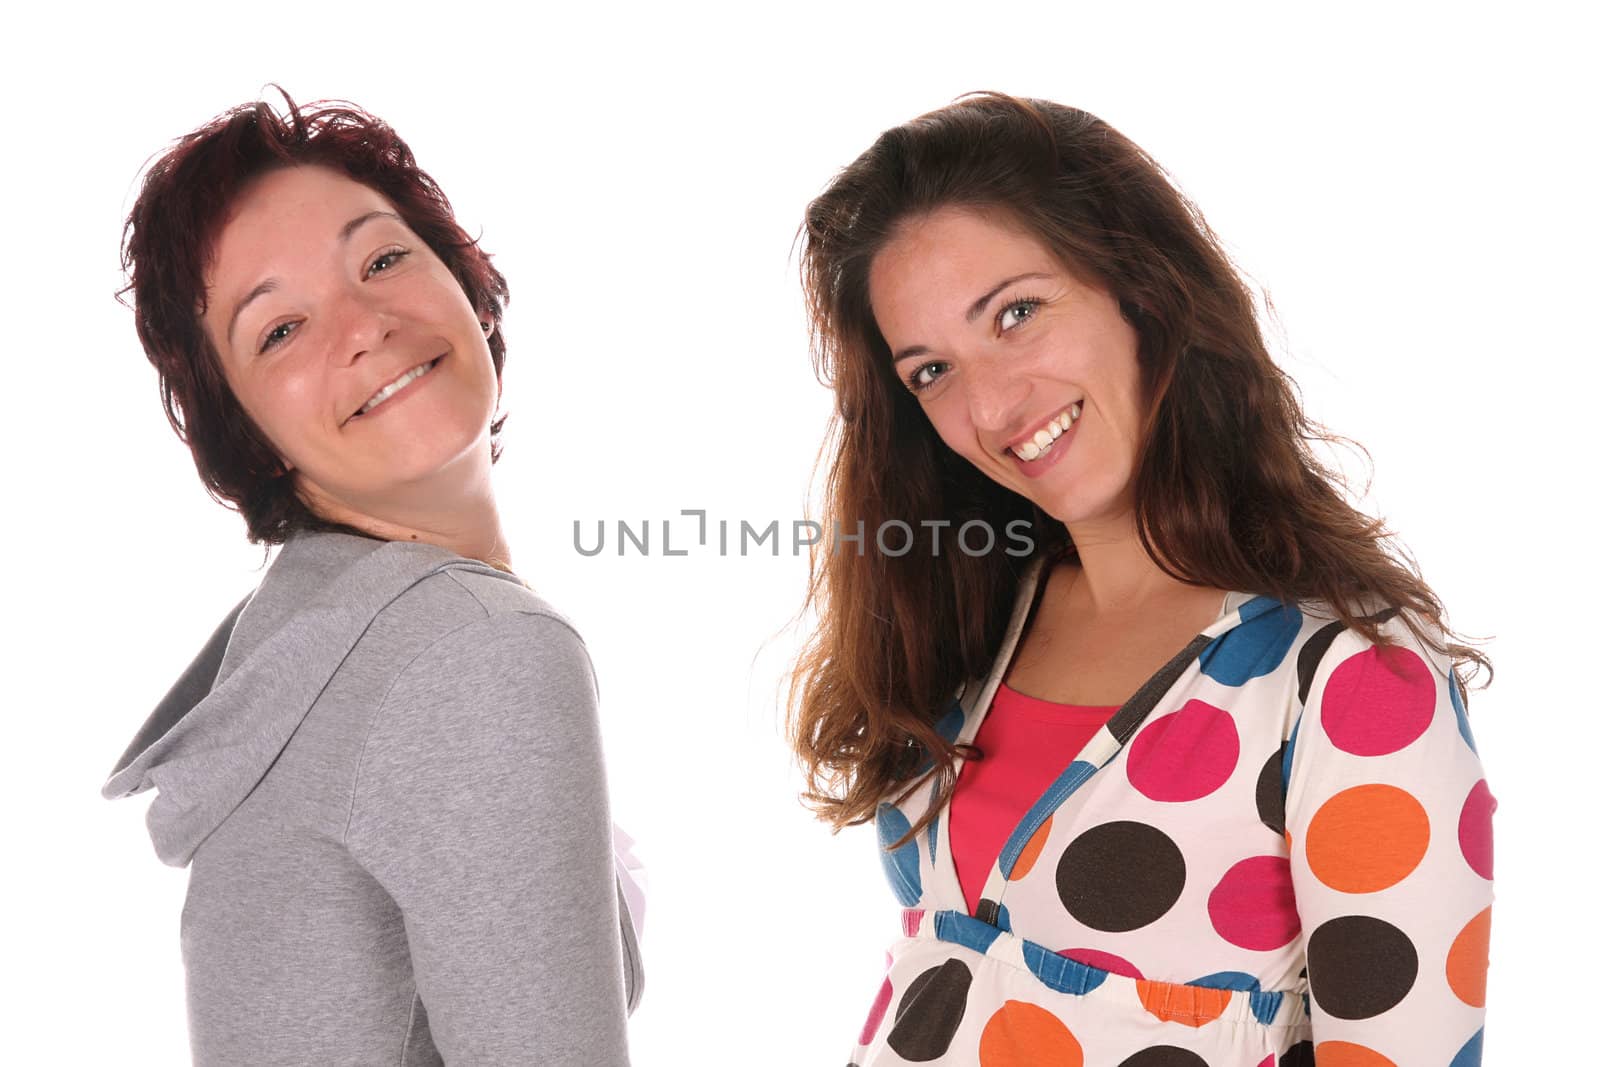 Two beautiful young woman over a white background